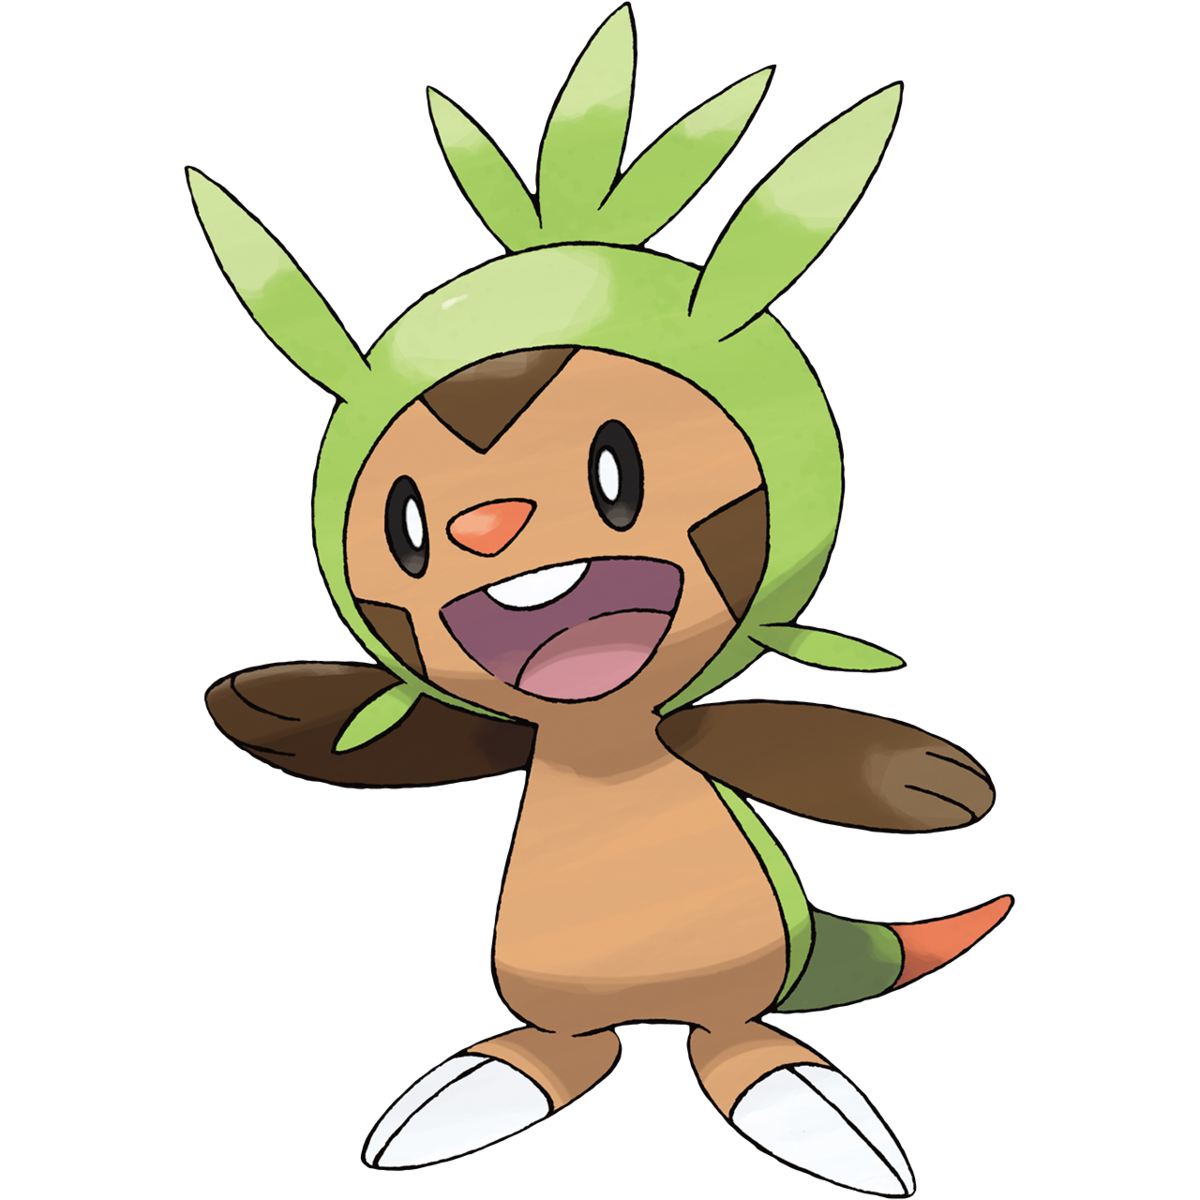 Chespin Pokemon PNG Image